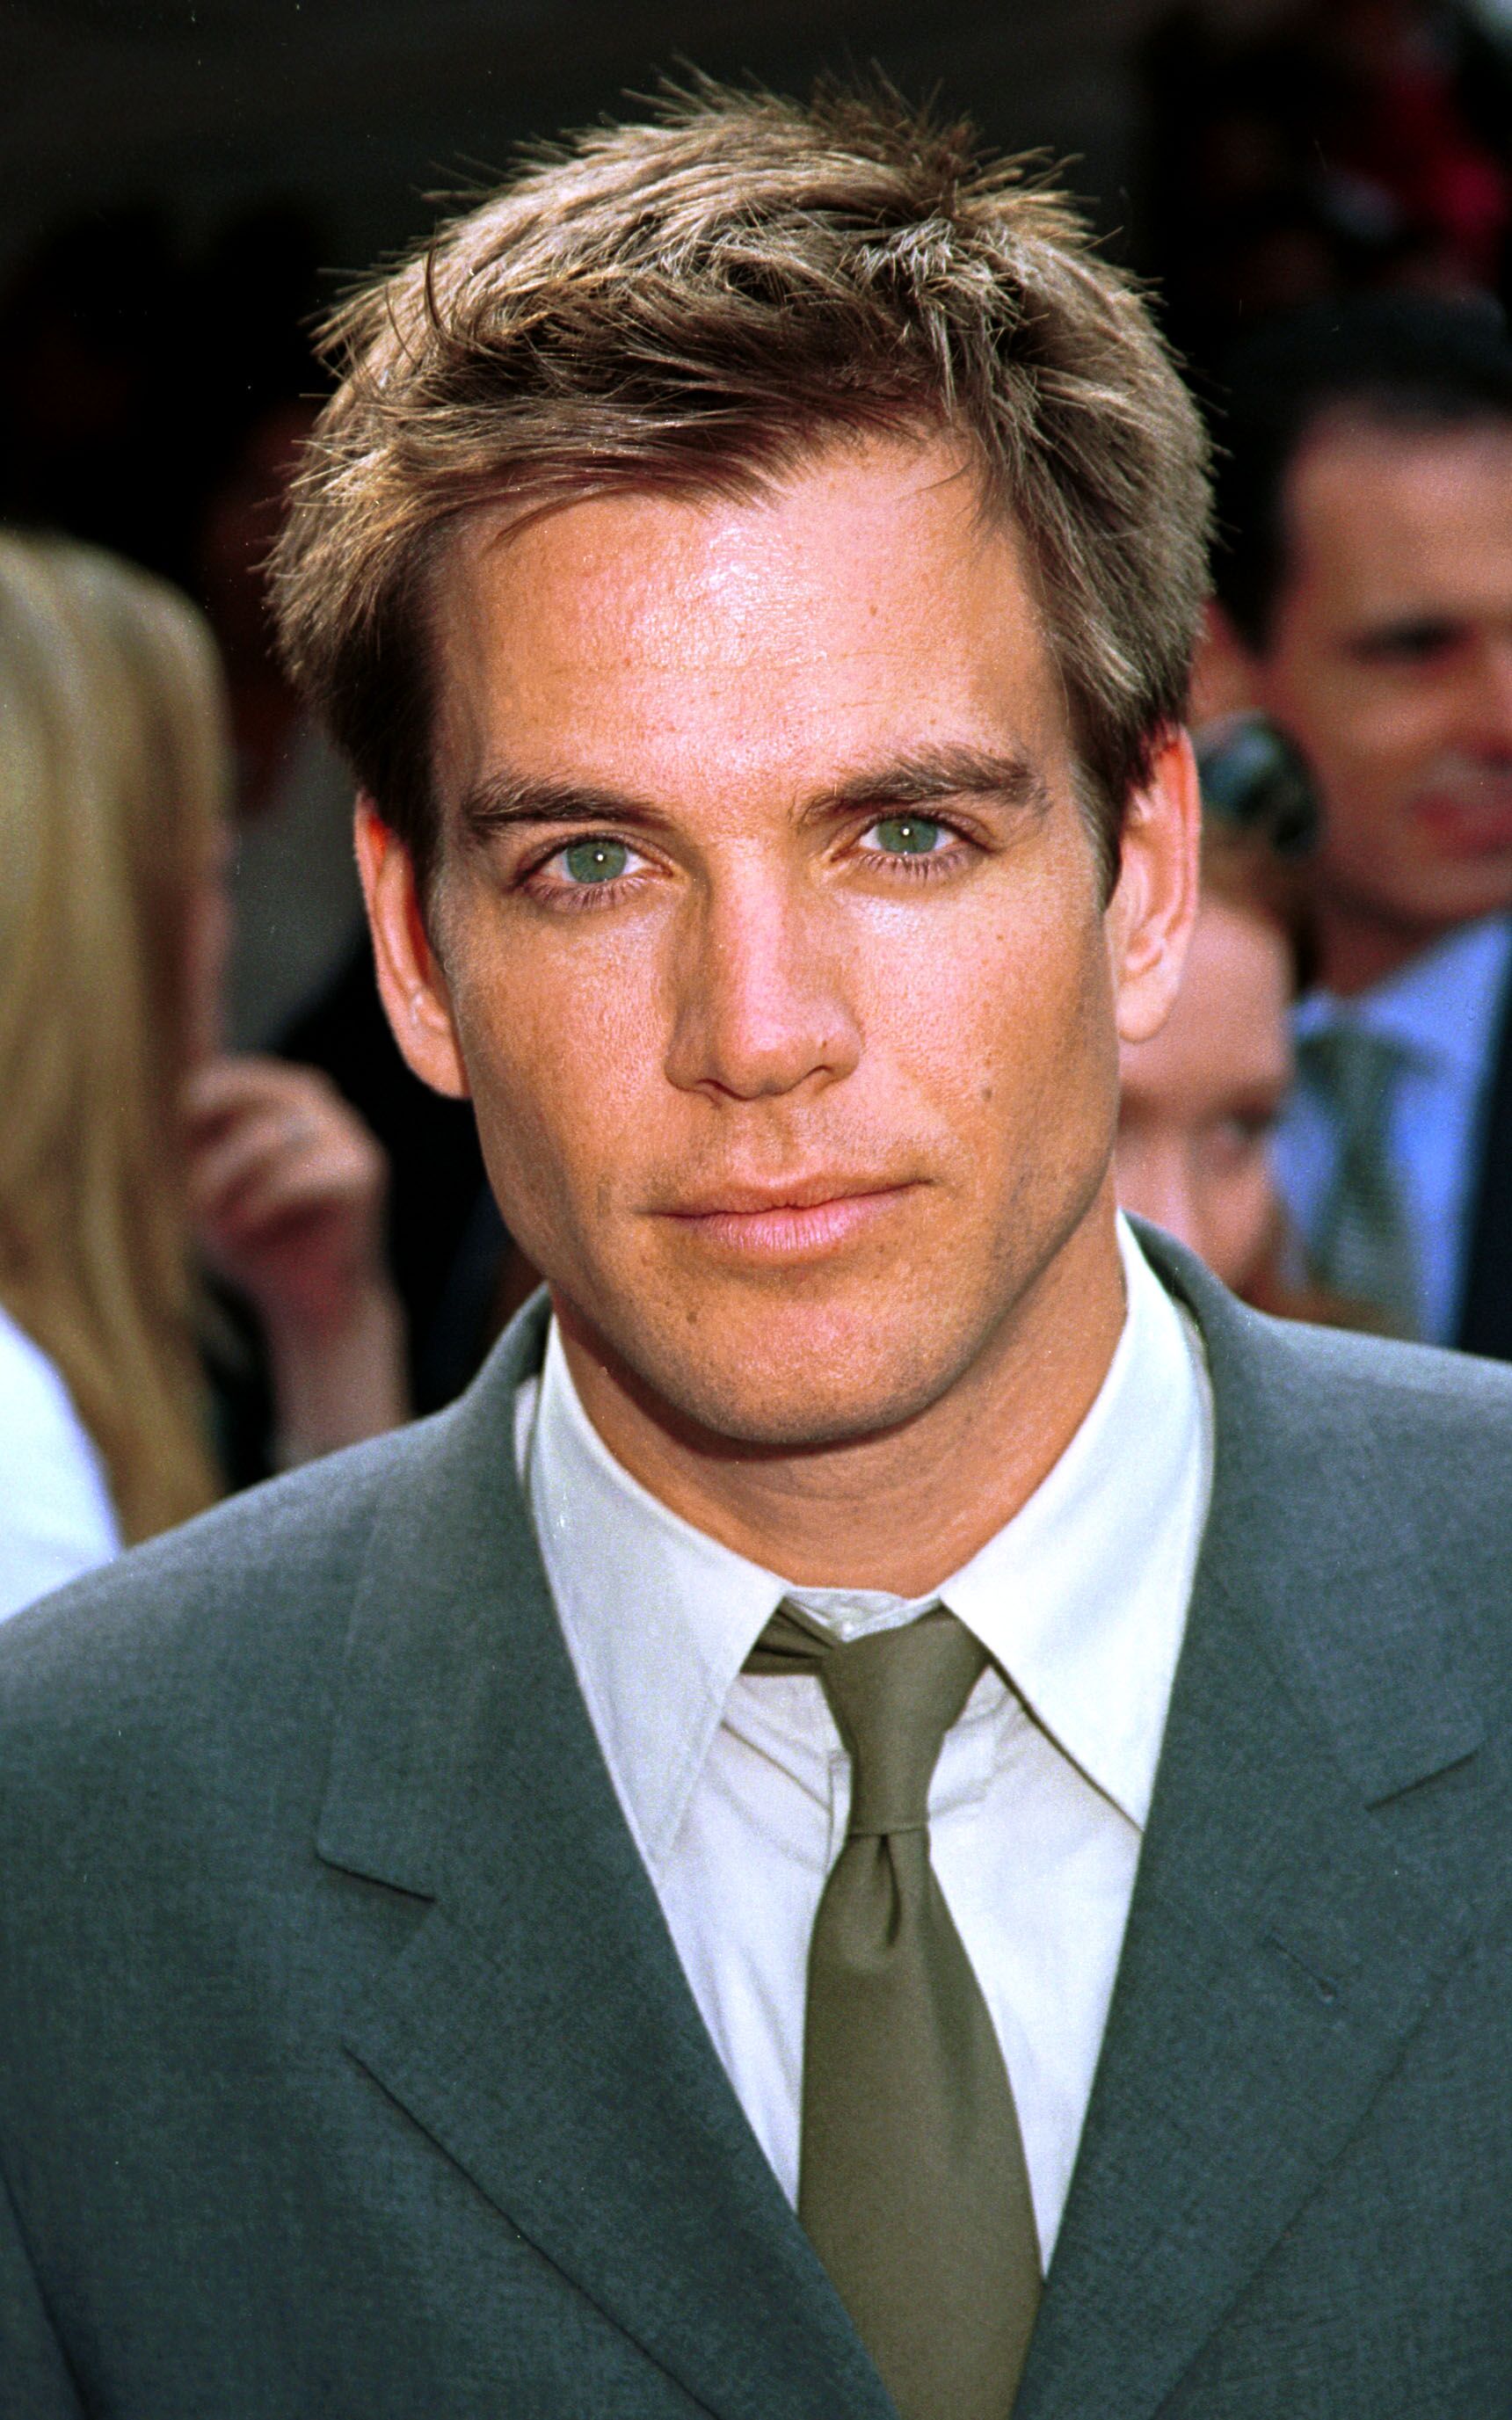 Michael Weatherly assiste au Fox Network "Fall Lineup", le 18 mai 2000 au Lincoln Center |  Getty Images